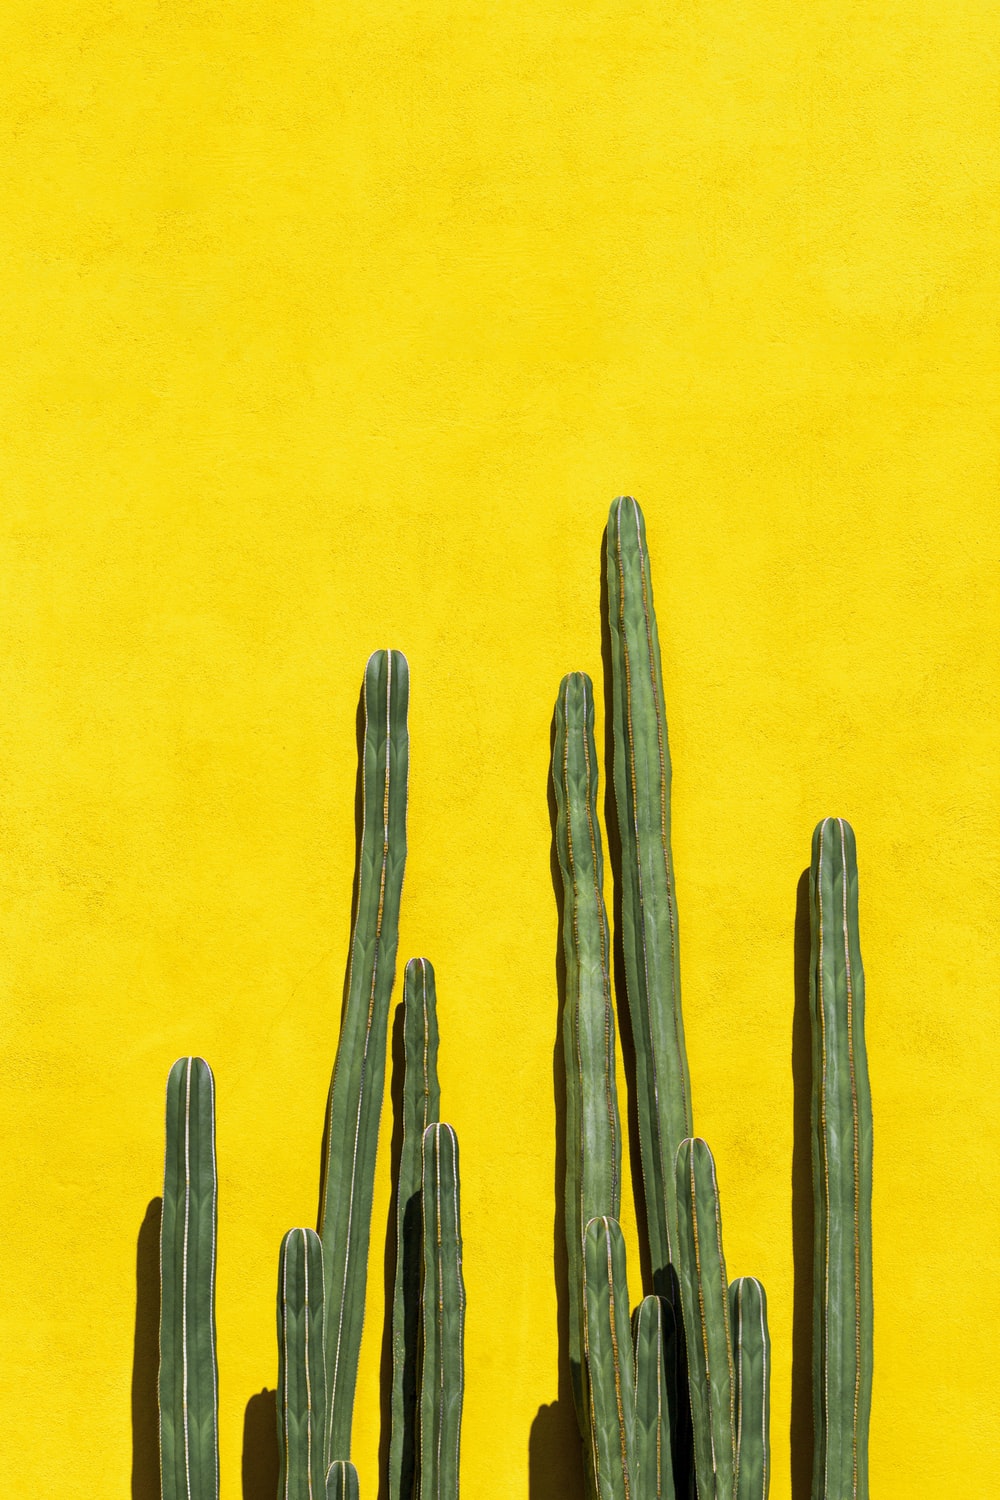 Cactus Wallpaper Picture. Download Free Image